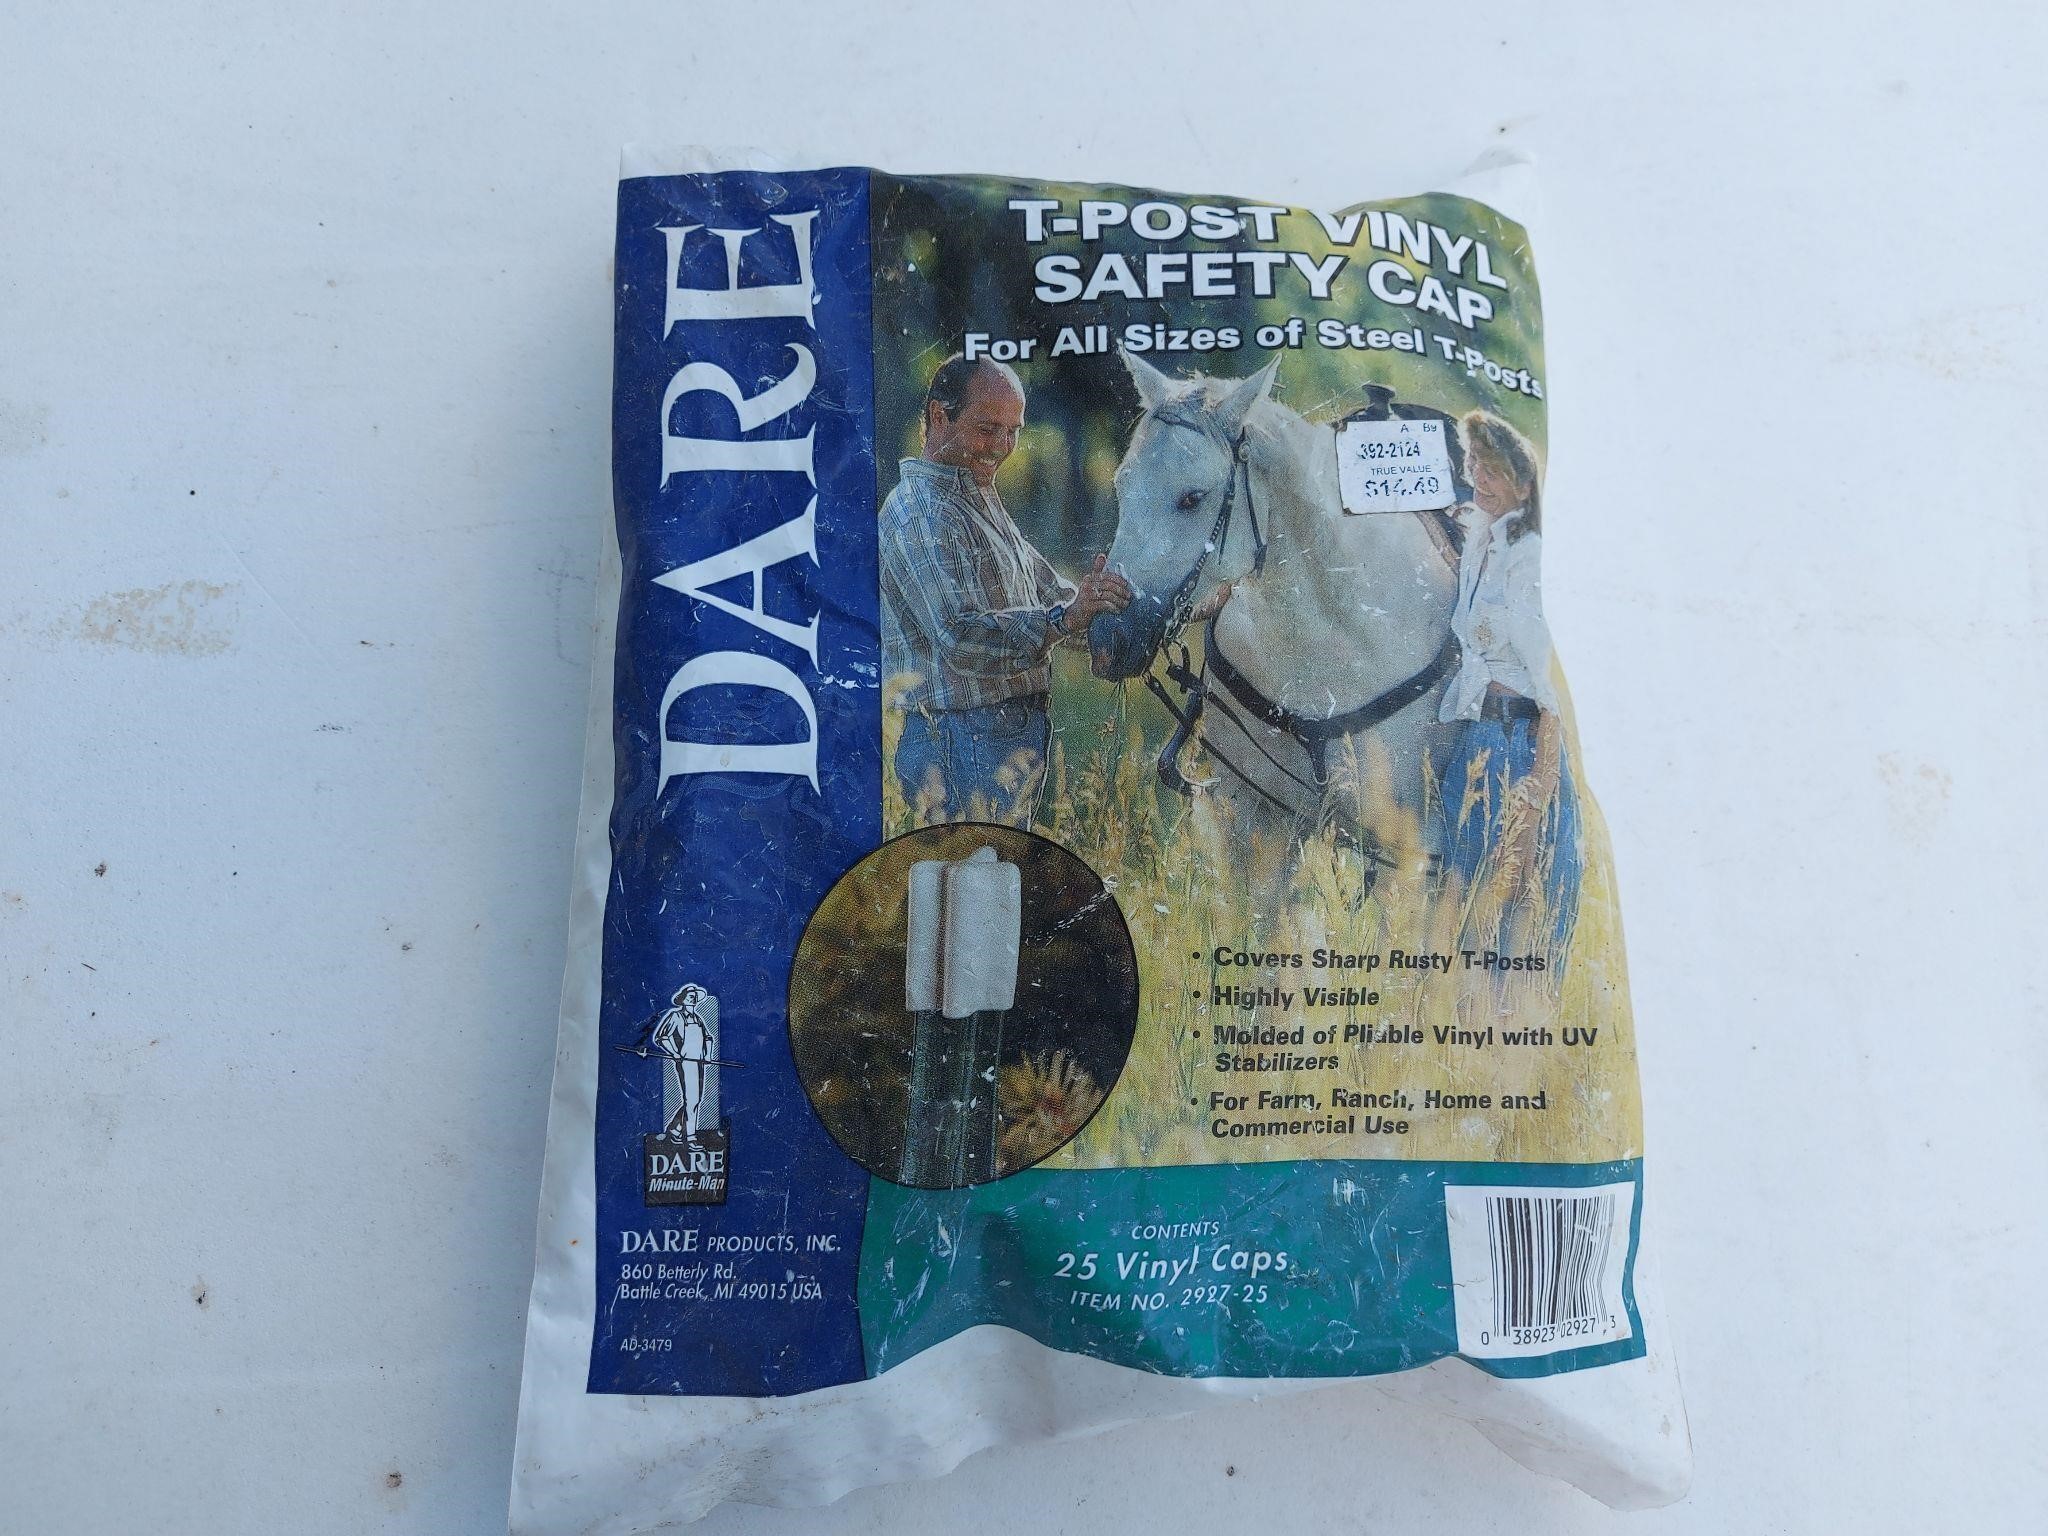 Fencing Supplies New in Bag